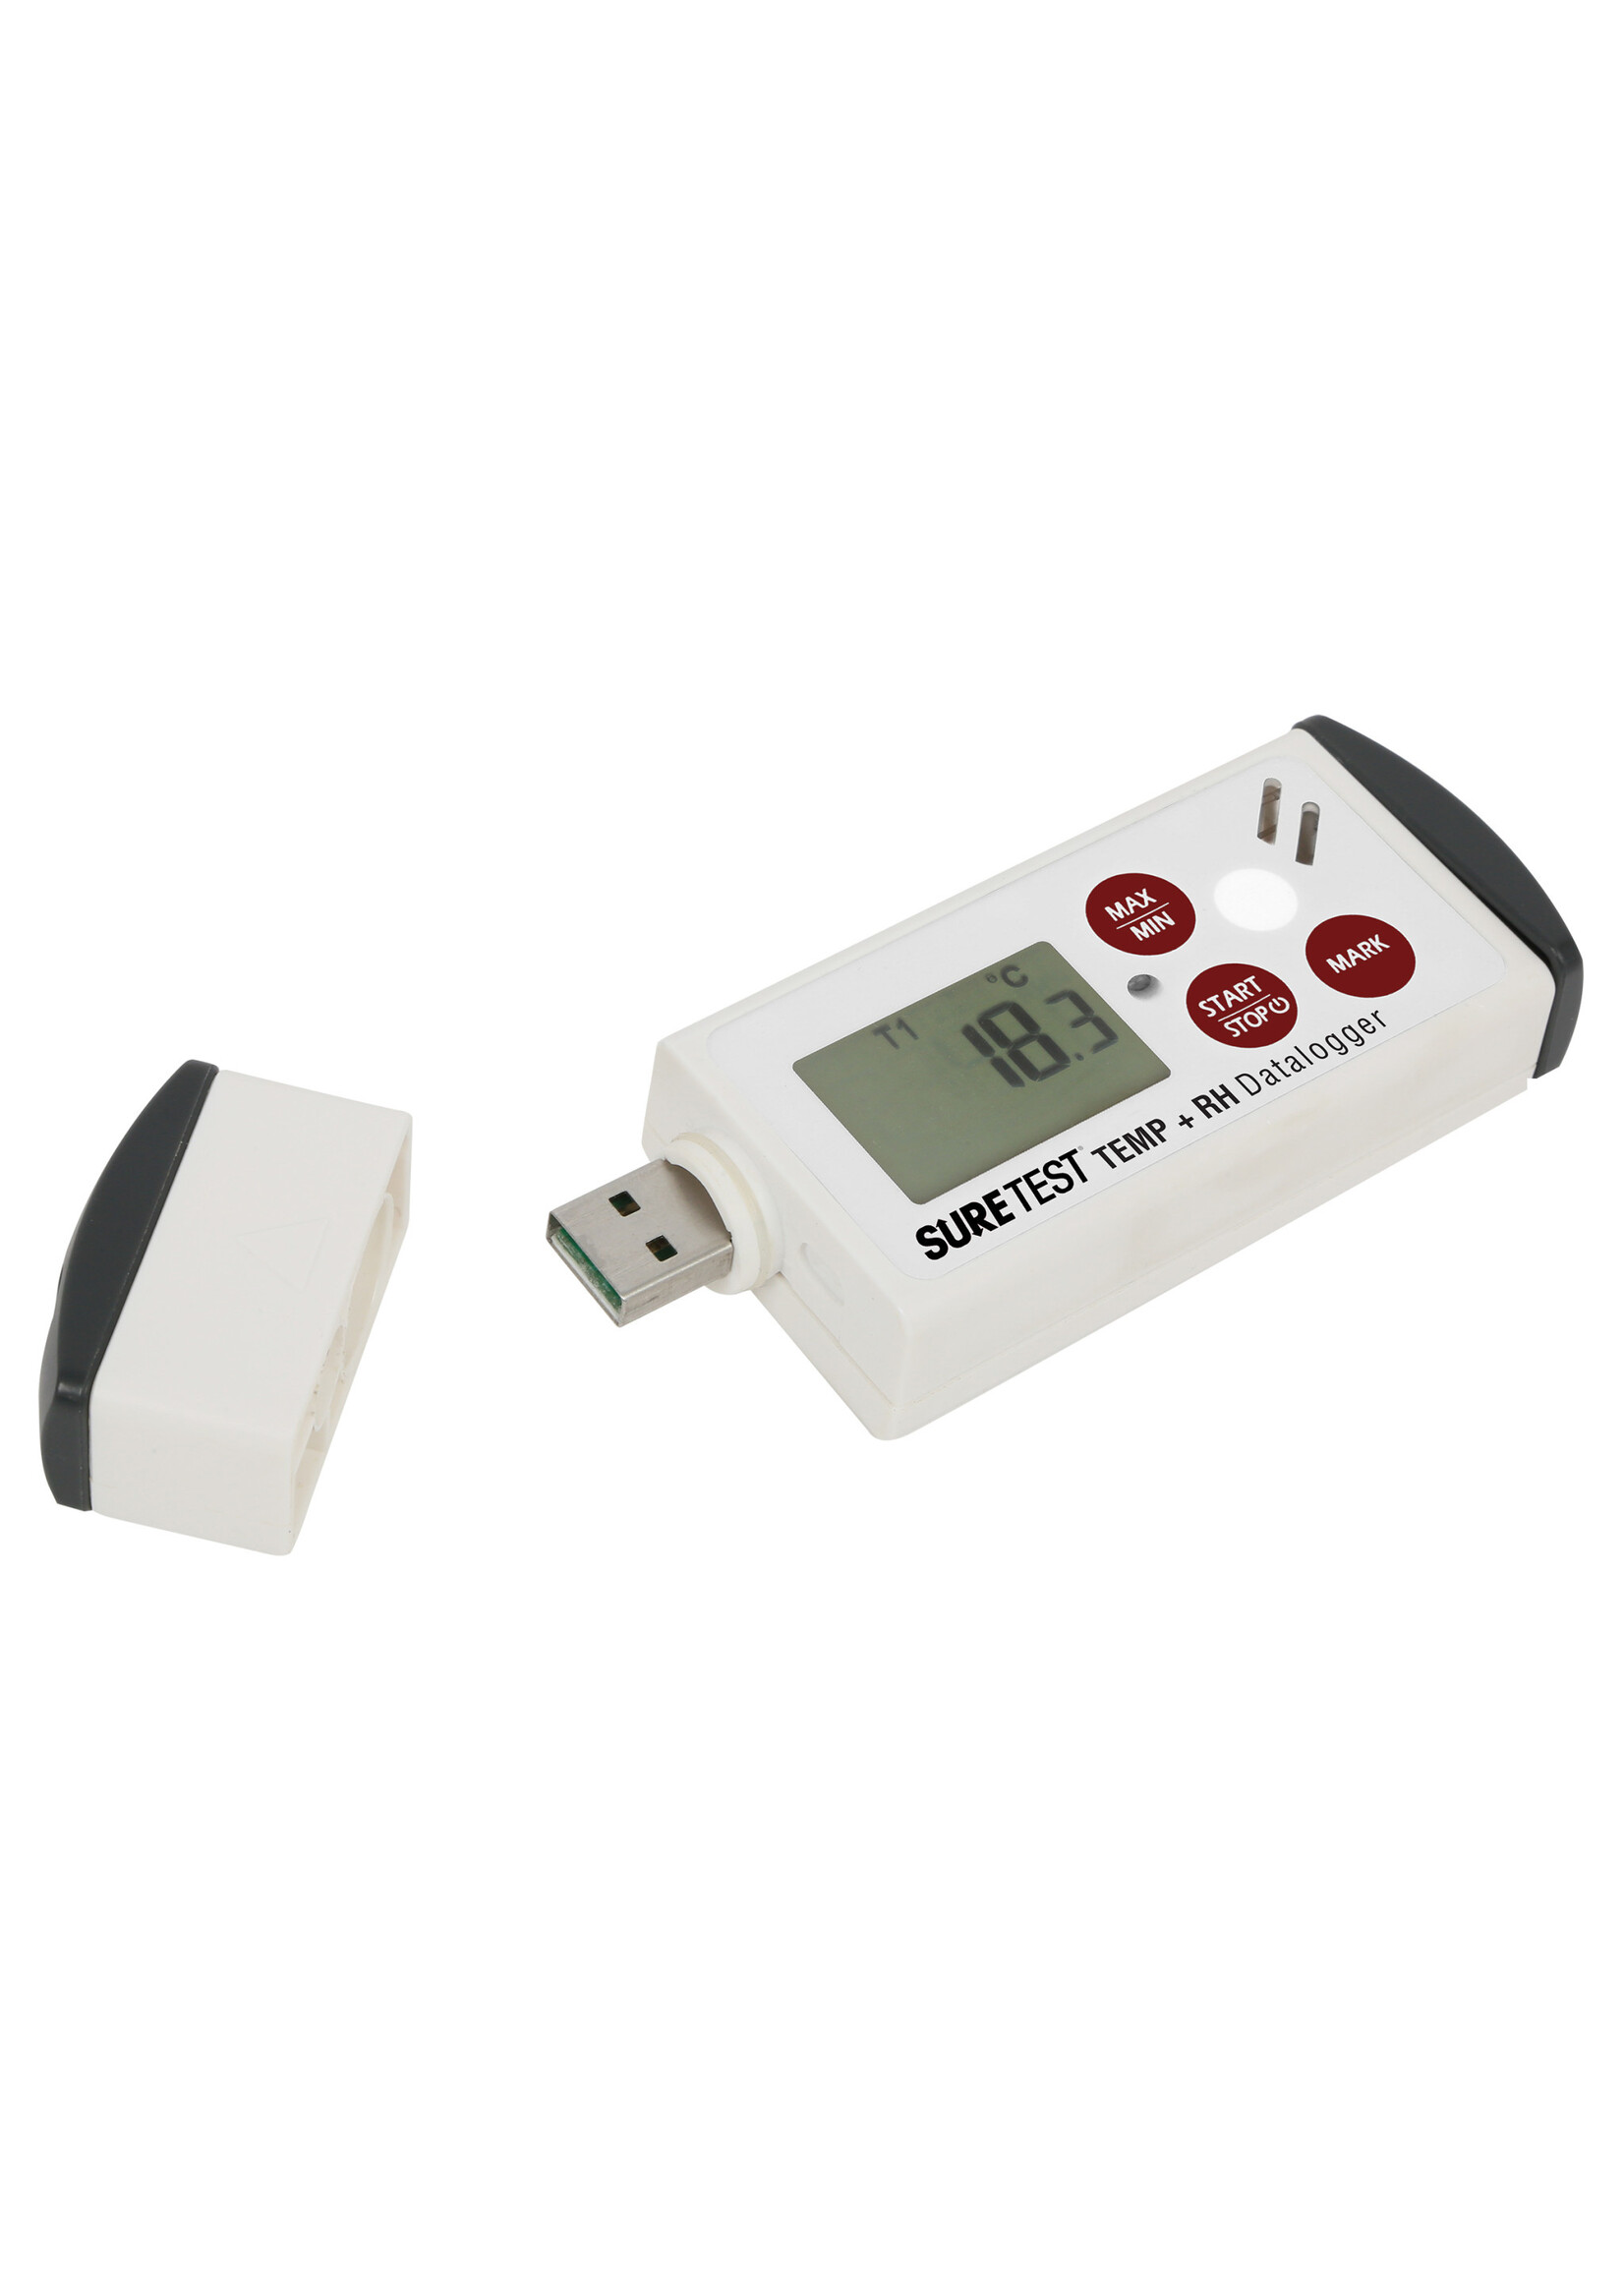 Sure Test Sure Test Temperature and Relative Humidity Data-Logger